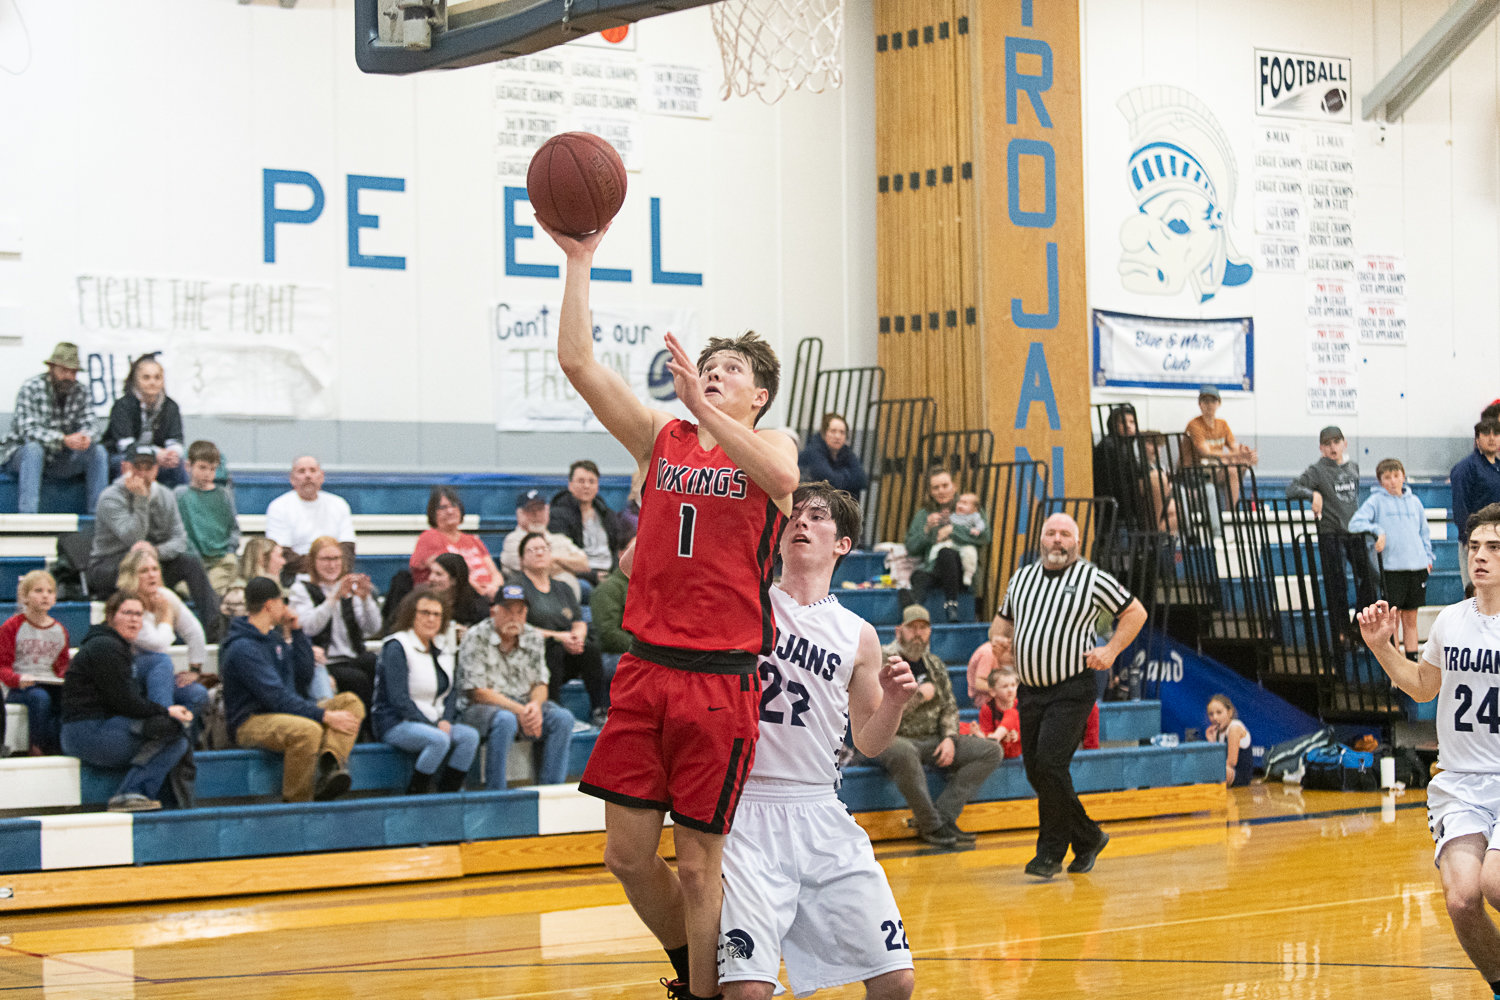 Keegan Kolb puts up a layup in transition during the second half of Mossyrock's 76-50 win at Pe Ell on Jan. 4.